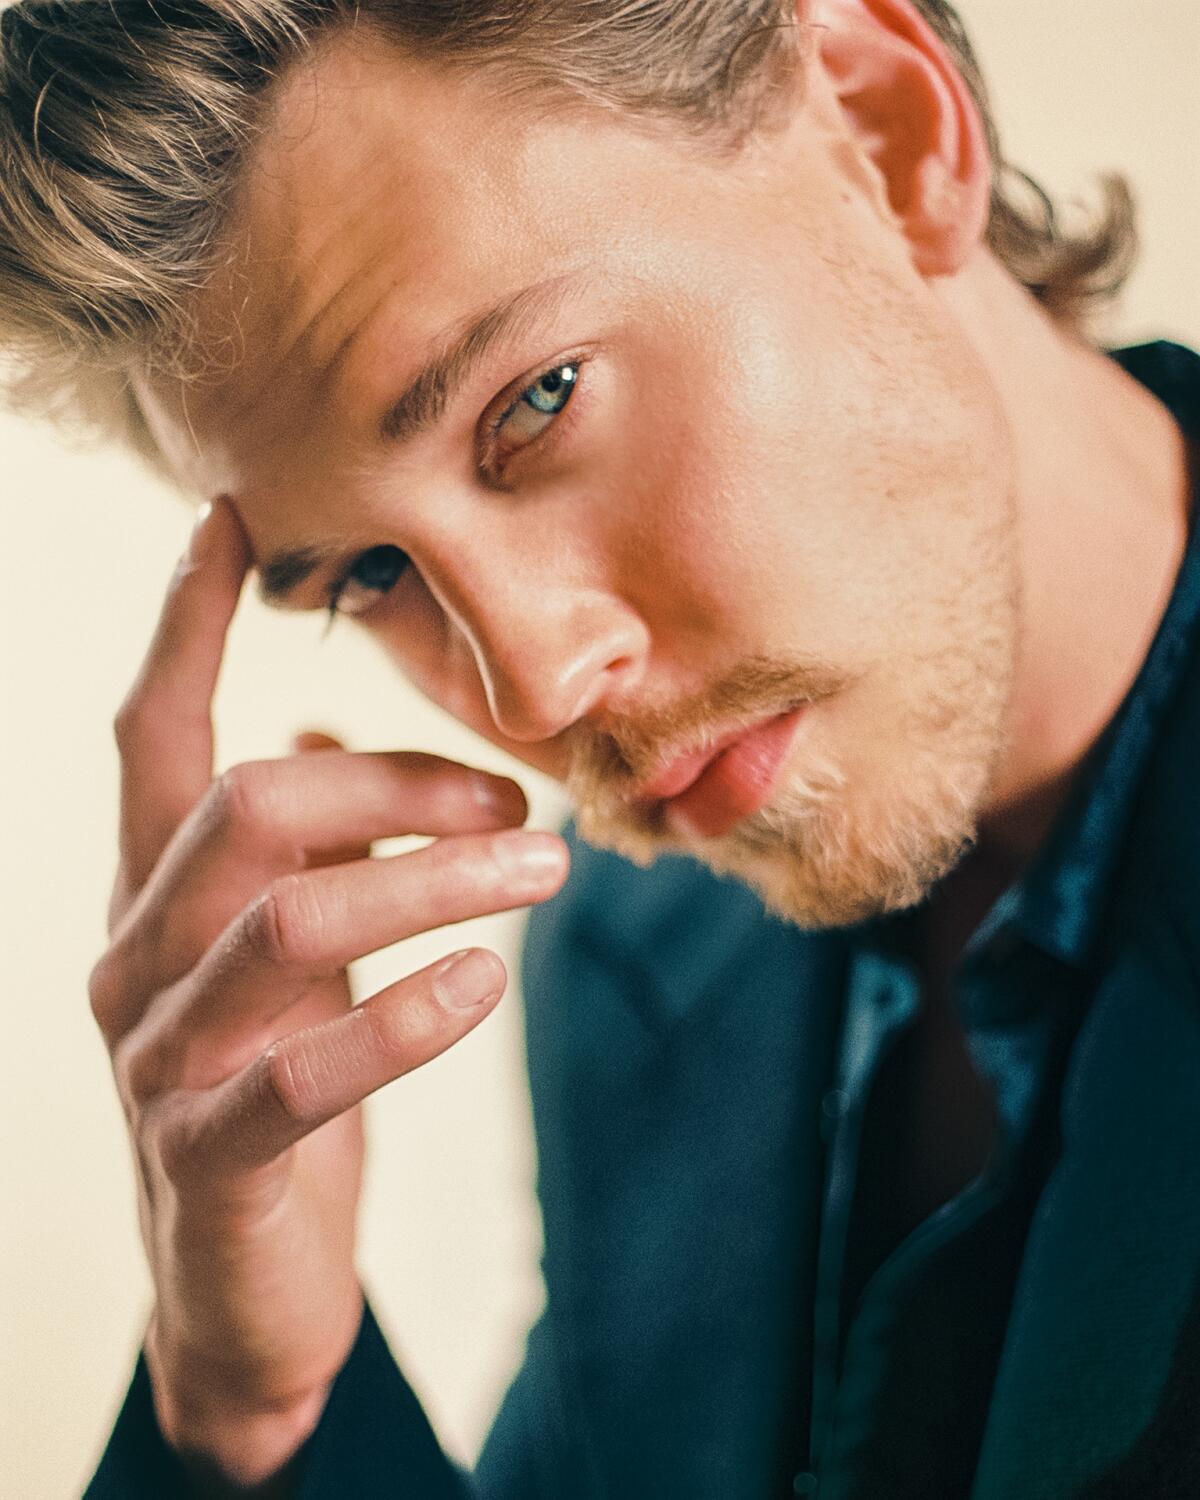 Austin Butler puts a finger to his forehead for a portrait.